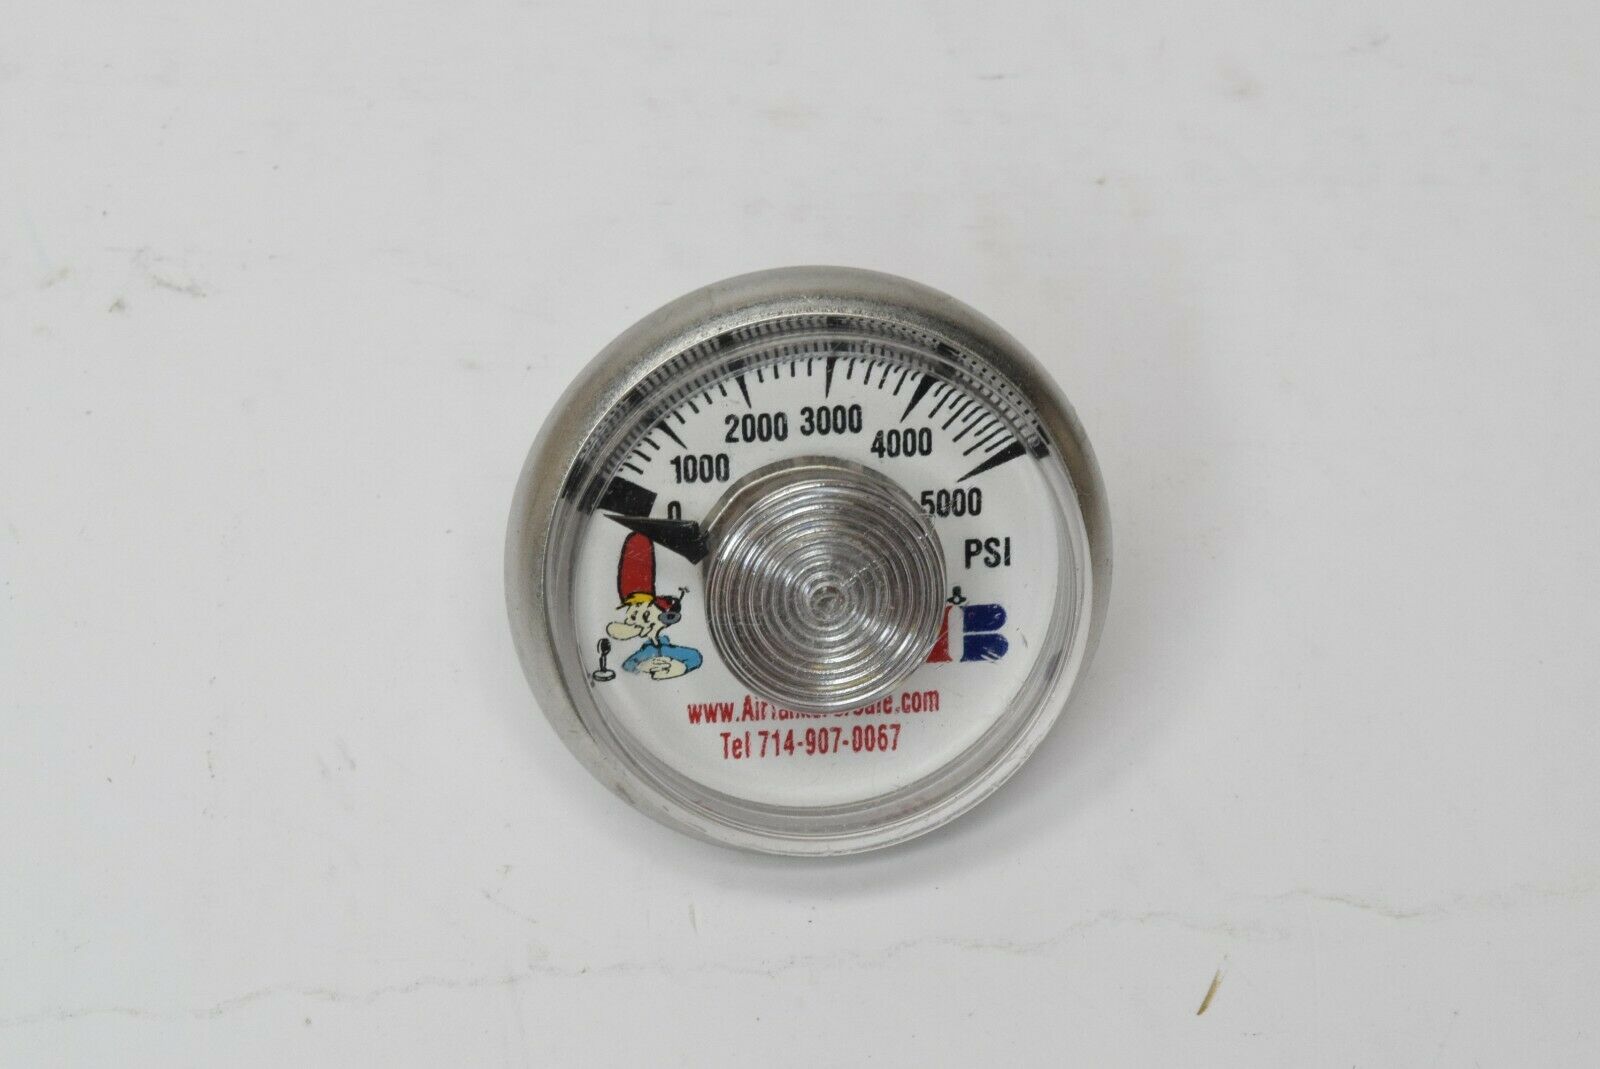 New 0-5000 Psi 1.5" High Pressure Air Tank Gauge 1/8" Npt 5000psi Hpa Paintball